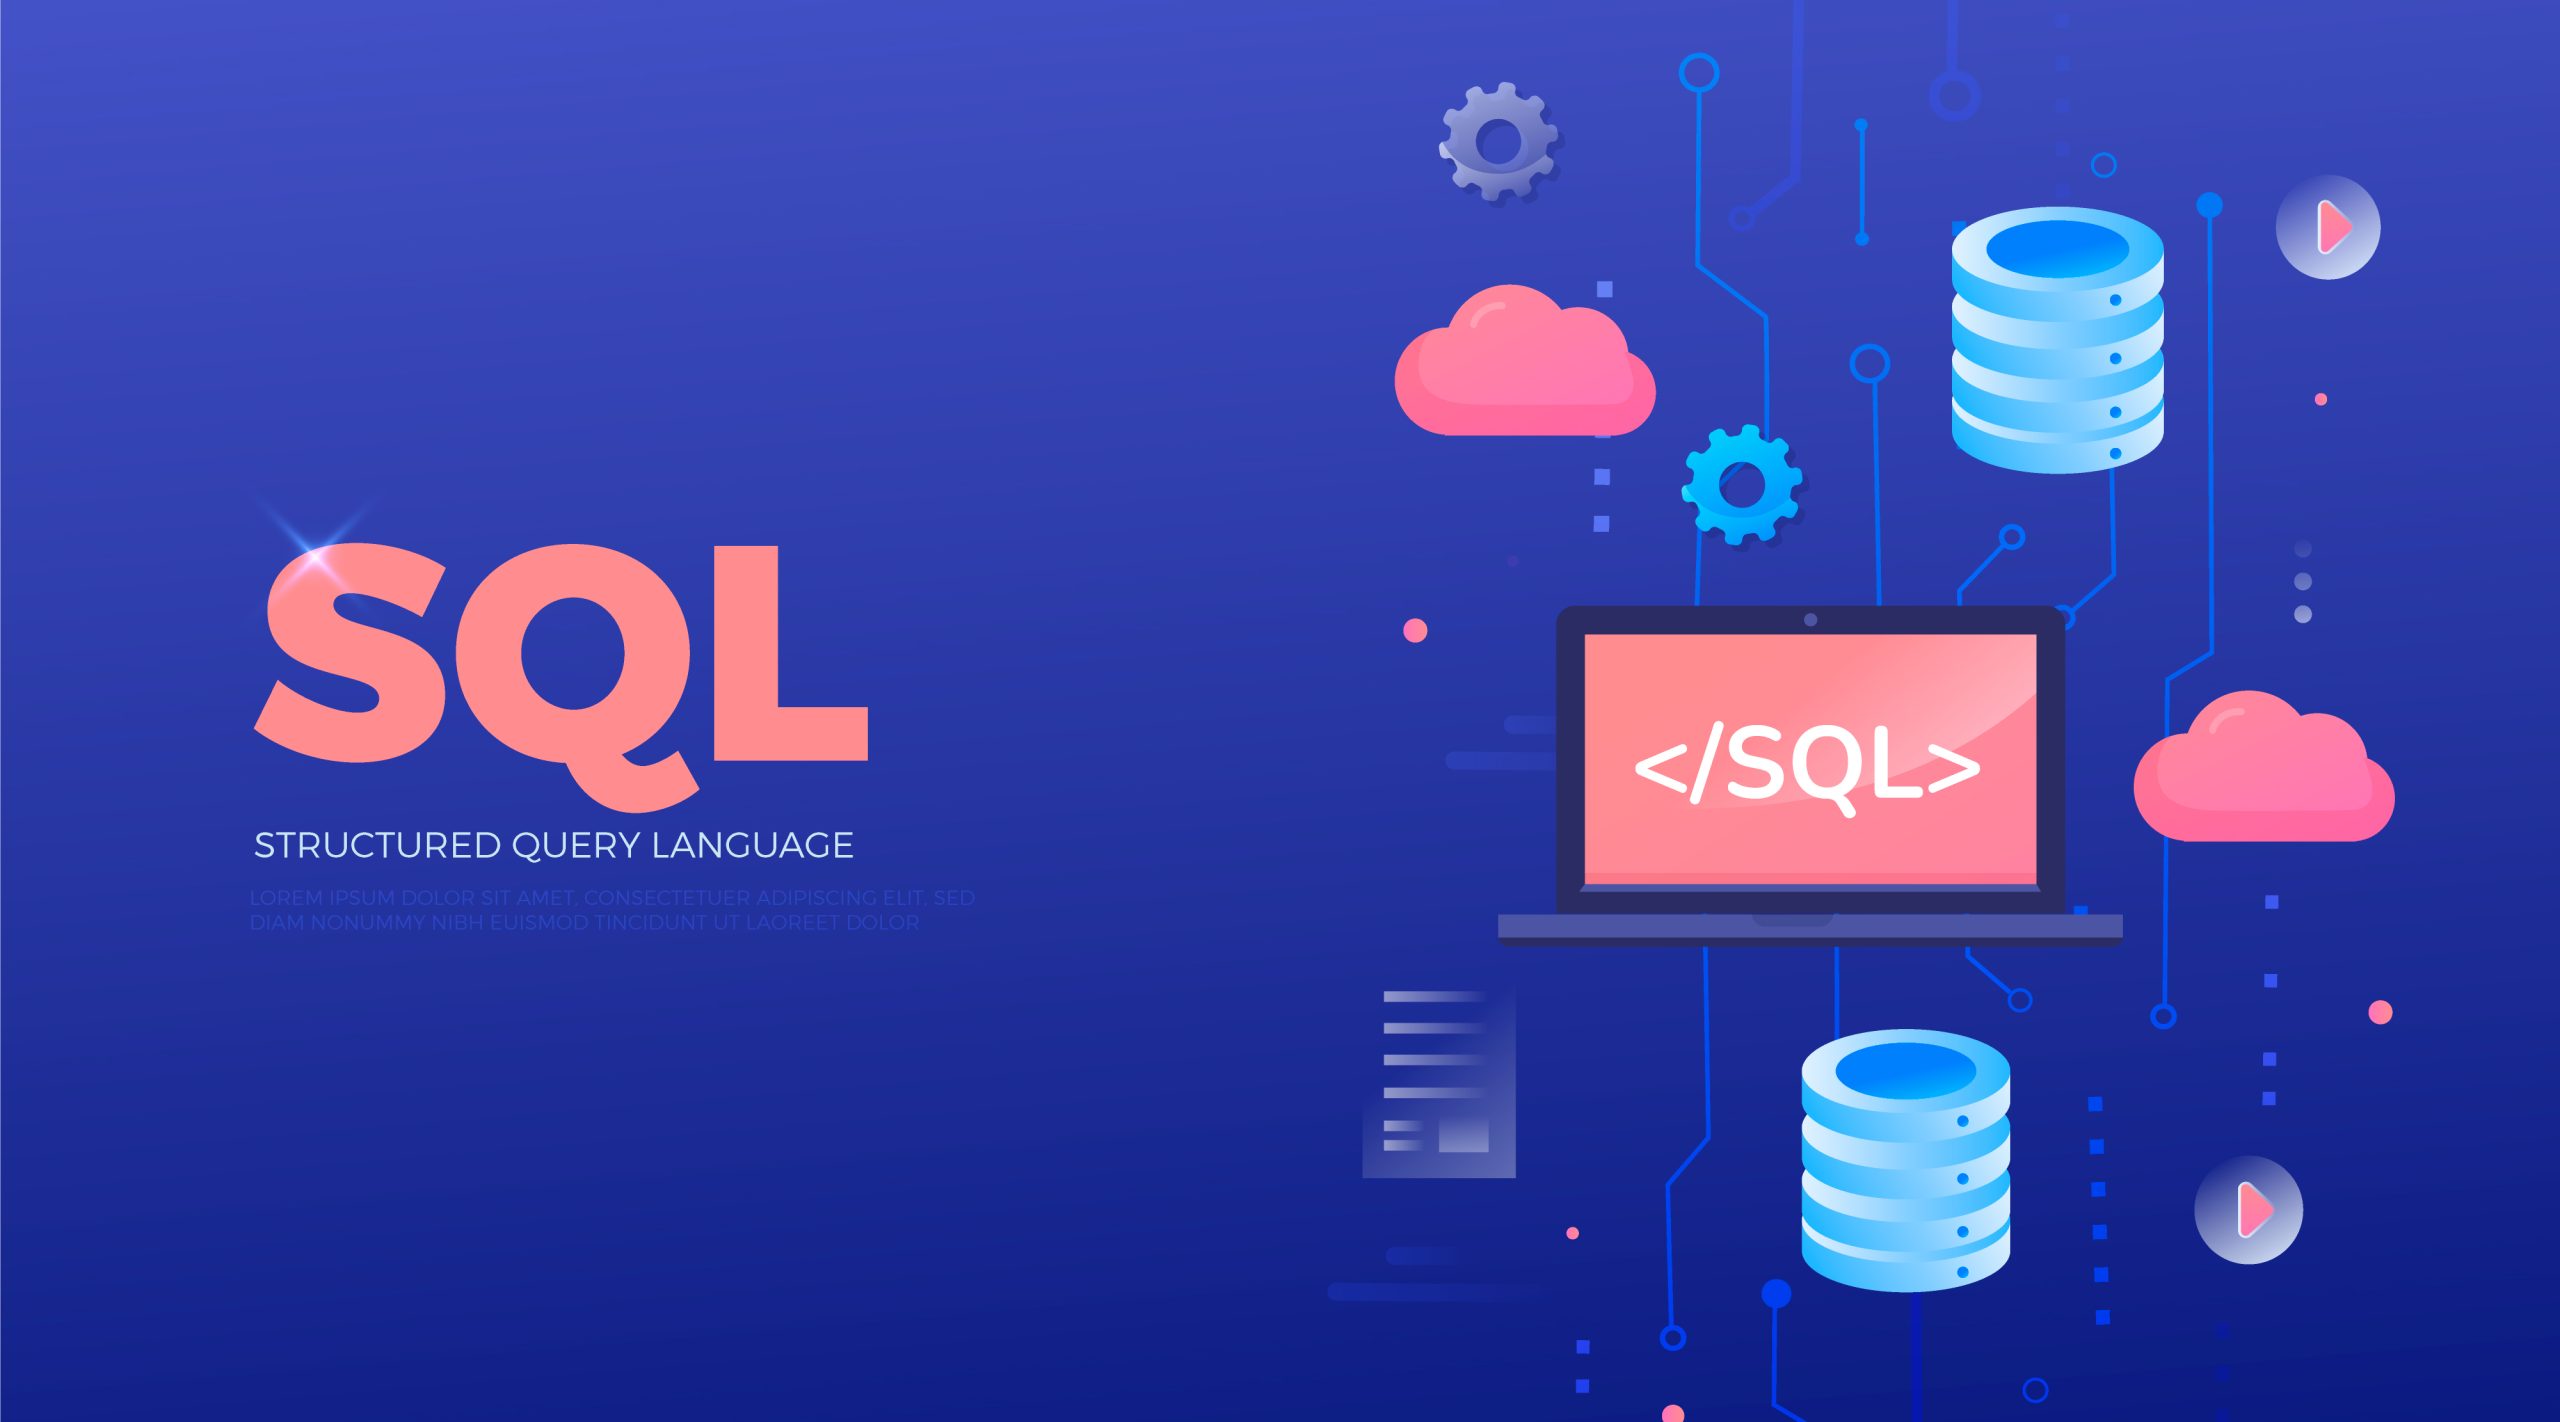 Get SQL Ready for 2023: 12 Free Online Courses and Certificates